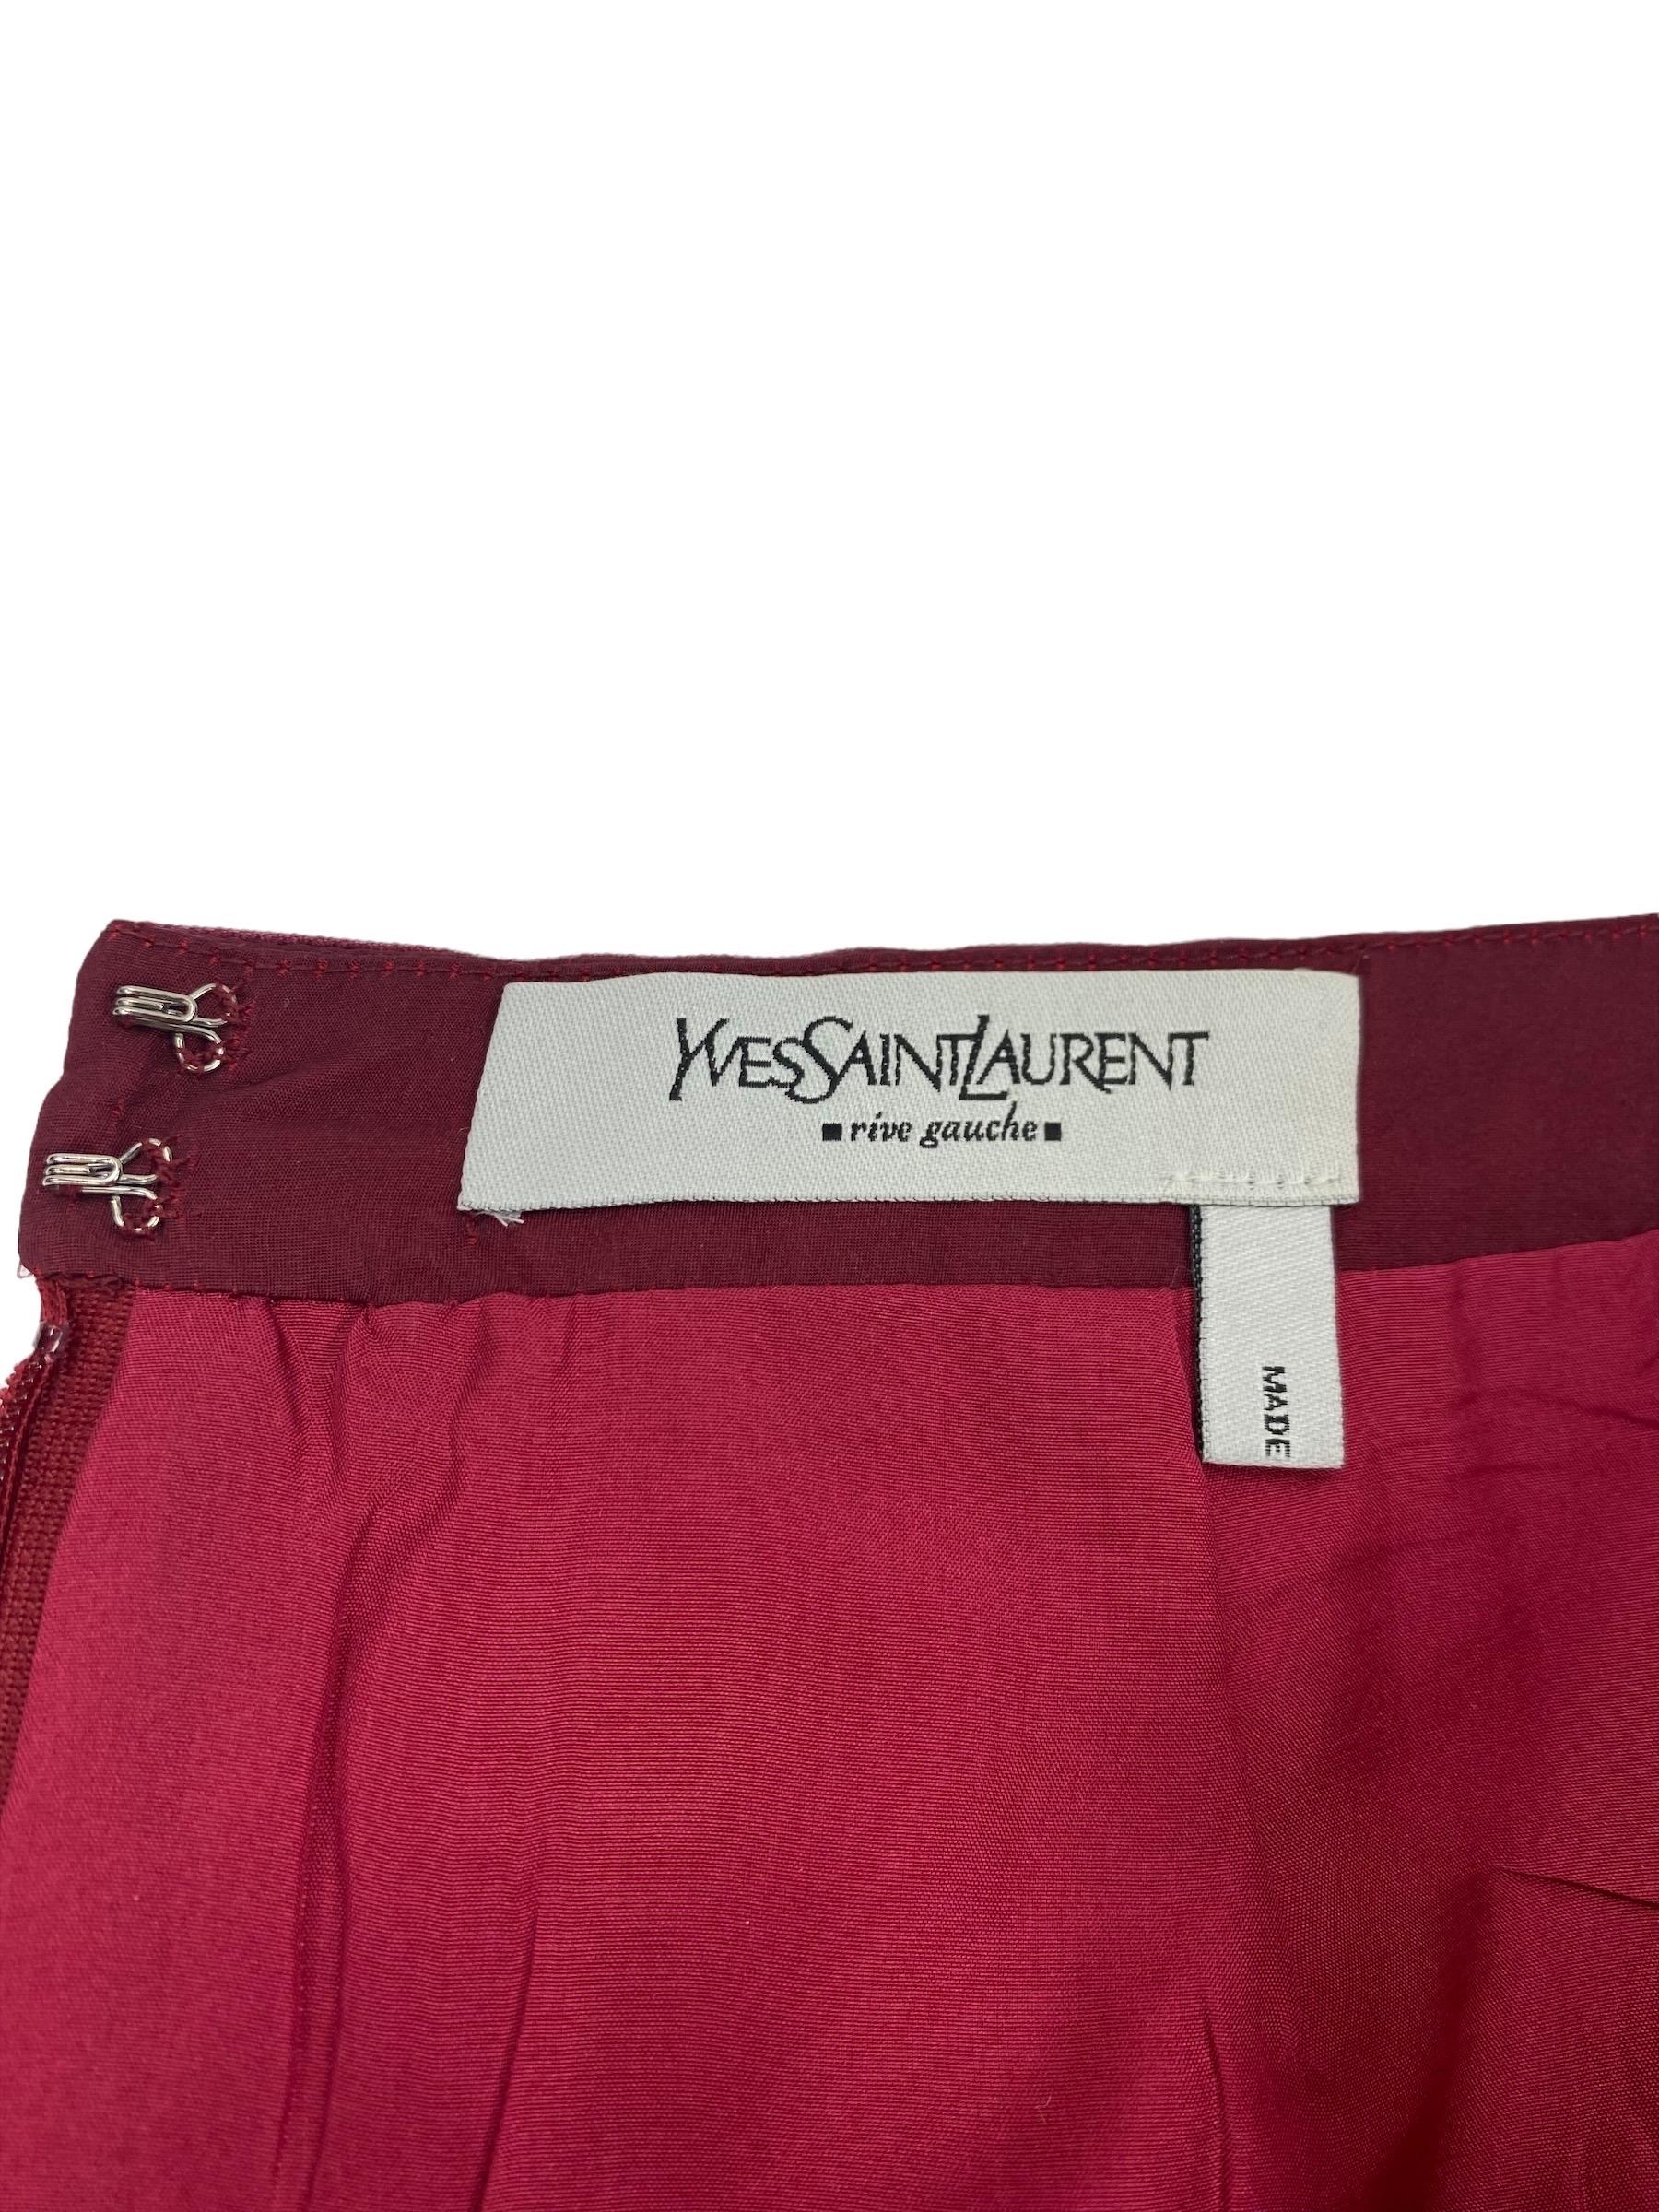 F/W 2004 Vintage Tom Ford for Yves Saint Laurent Layered Silk Skirt in Burgundy In Excellent Condition For Sale In Montgomery, TX